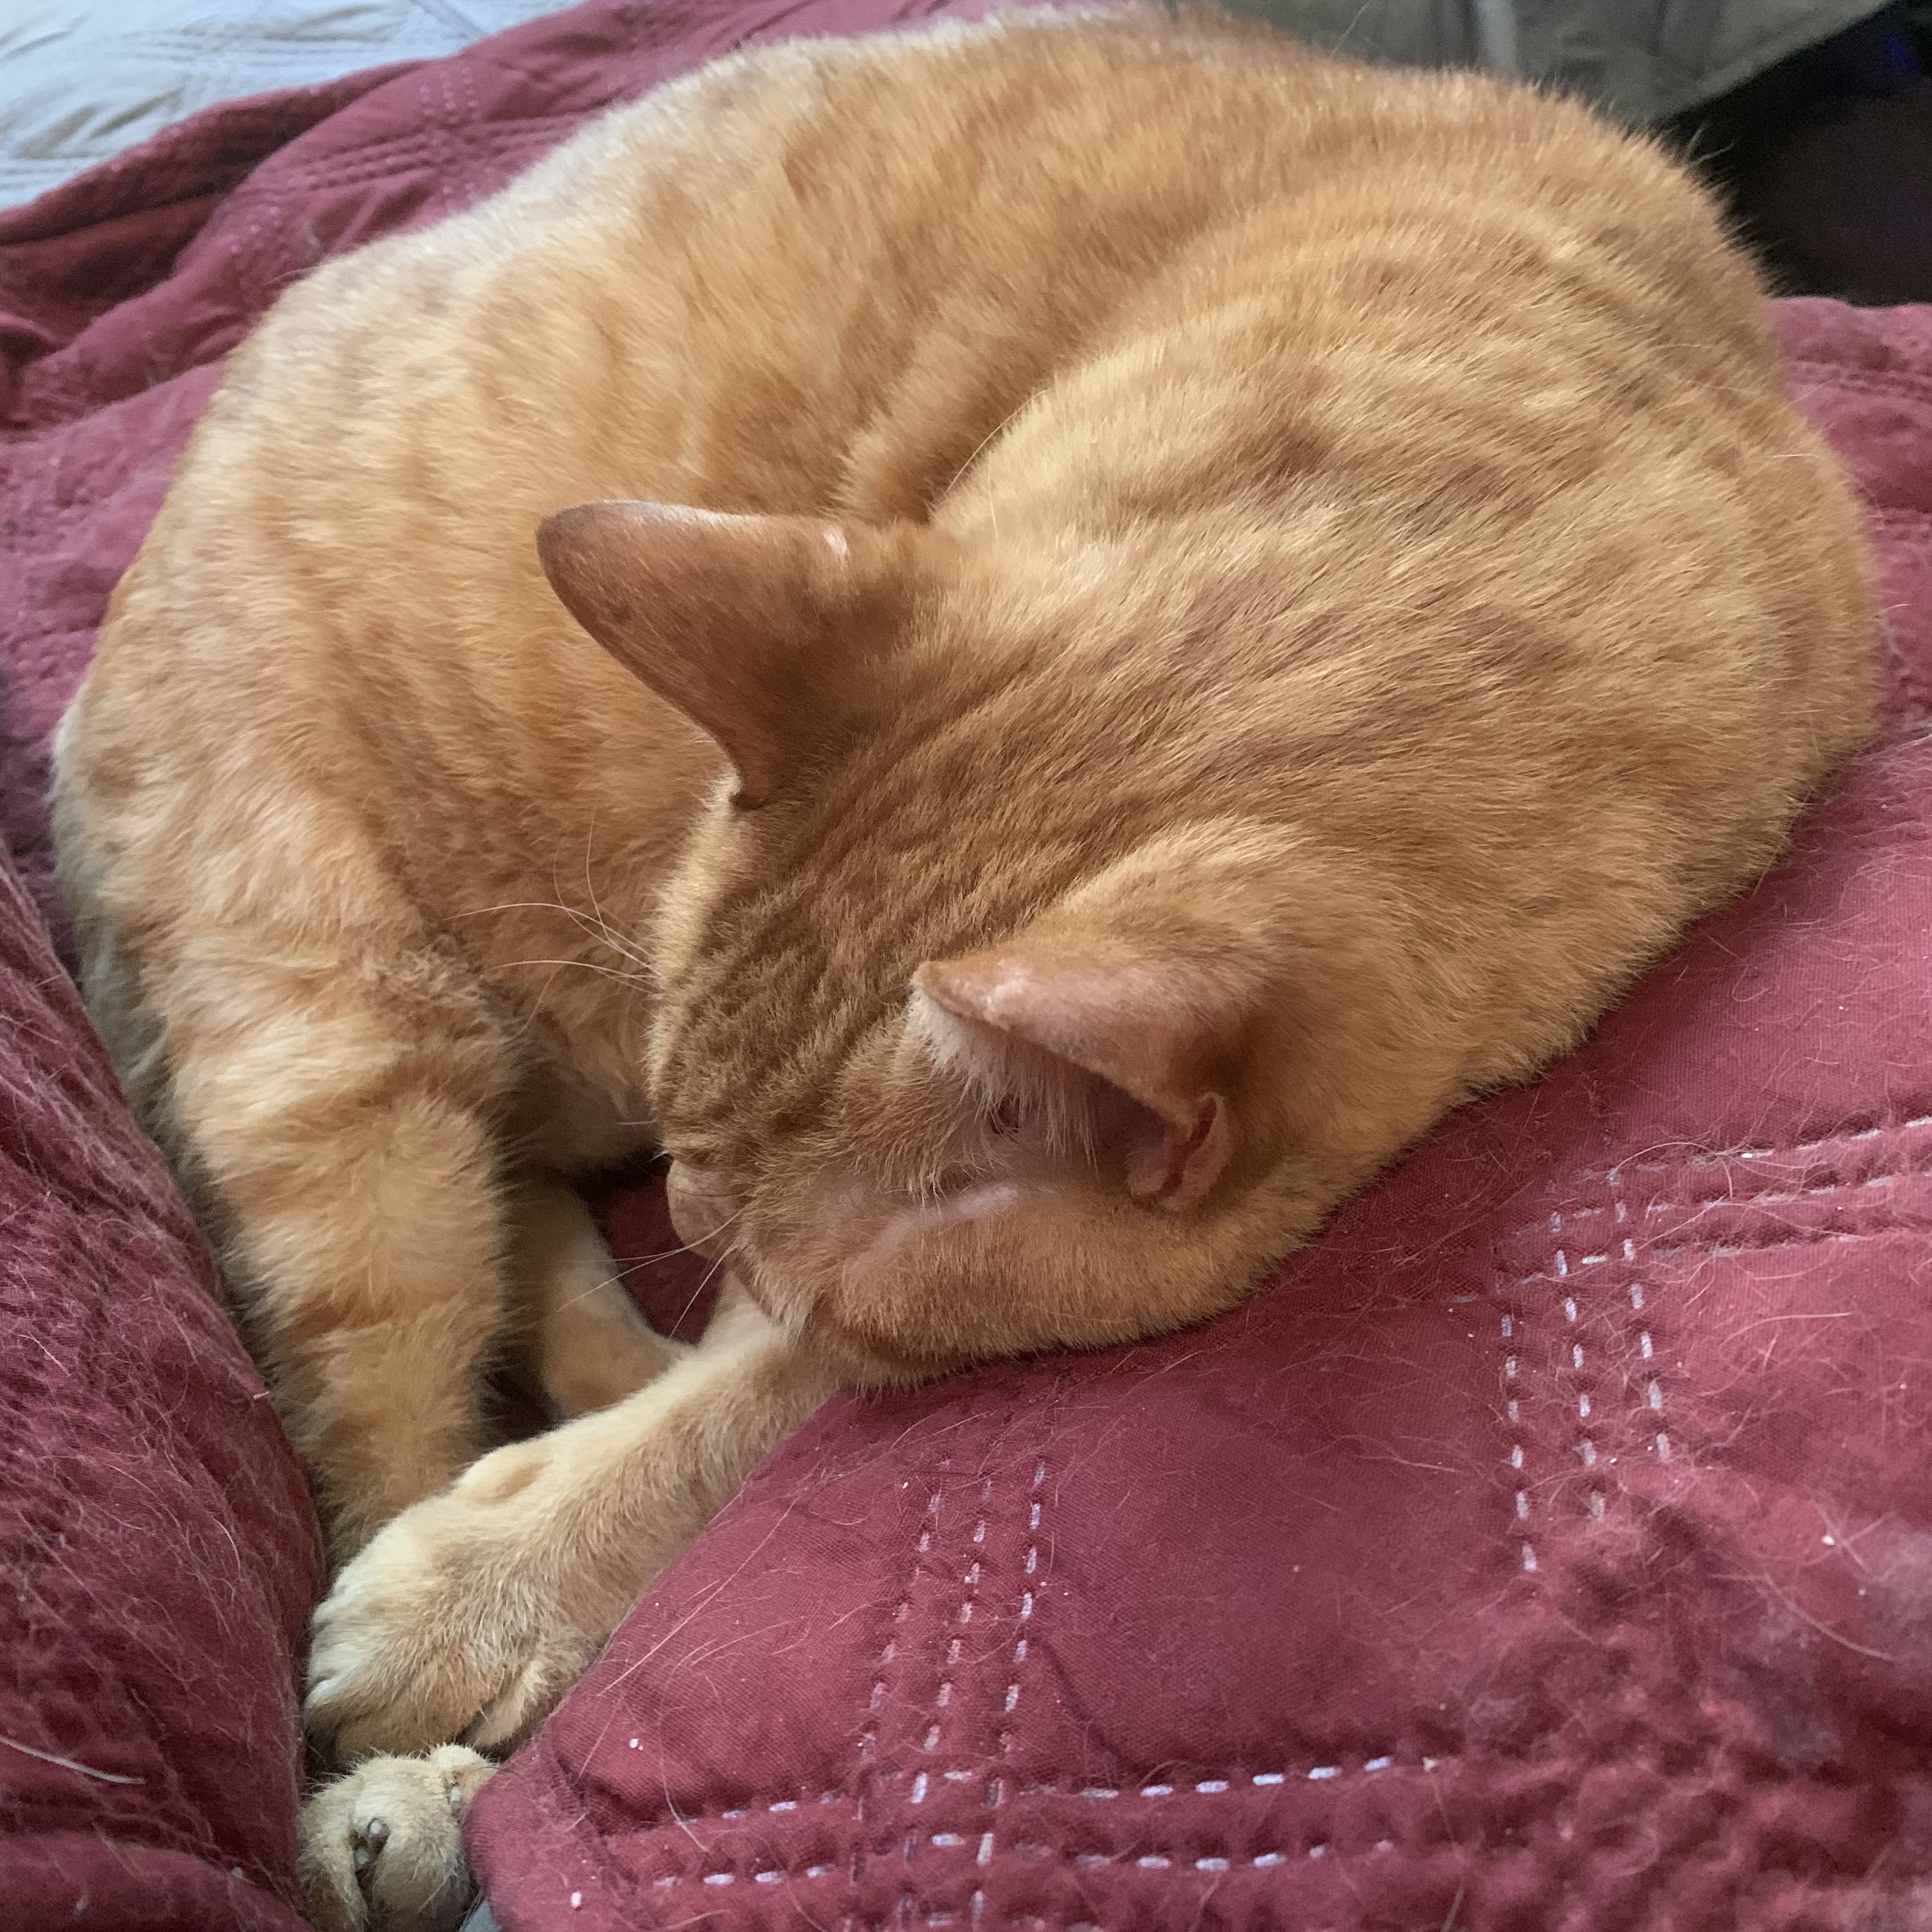 a picture of stanley laying curled up with his head on the arm of a couch. his face is cast down and away from the viewer